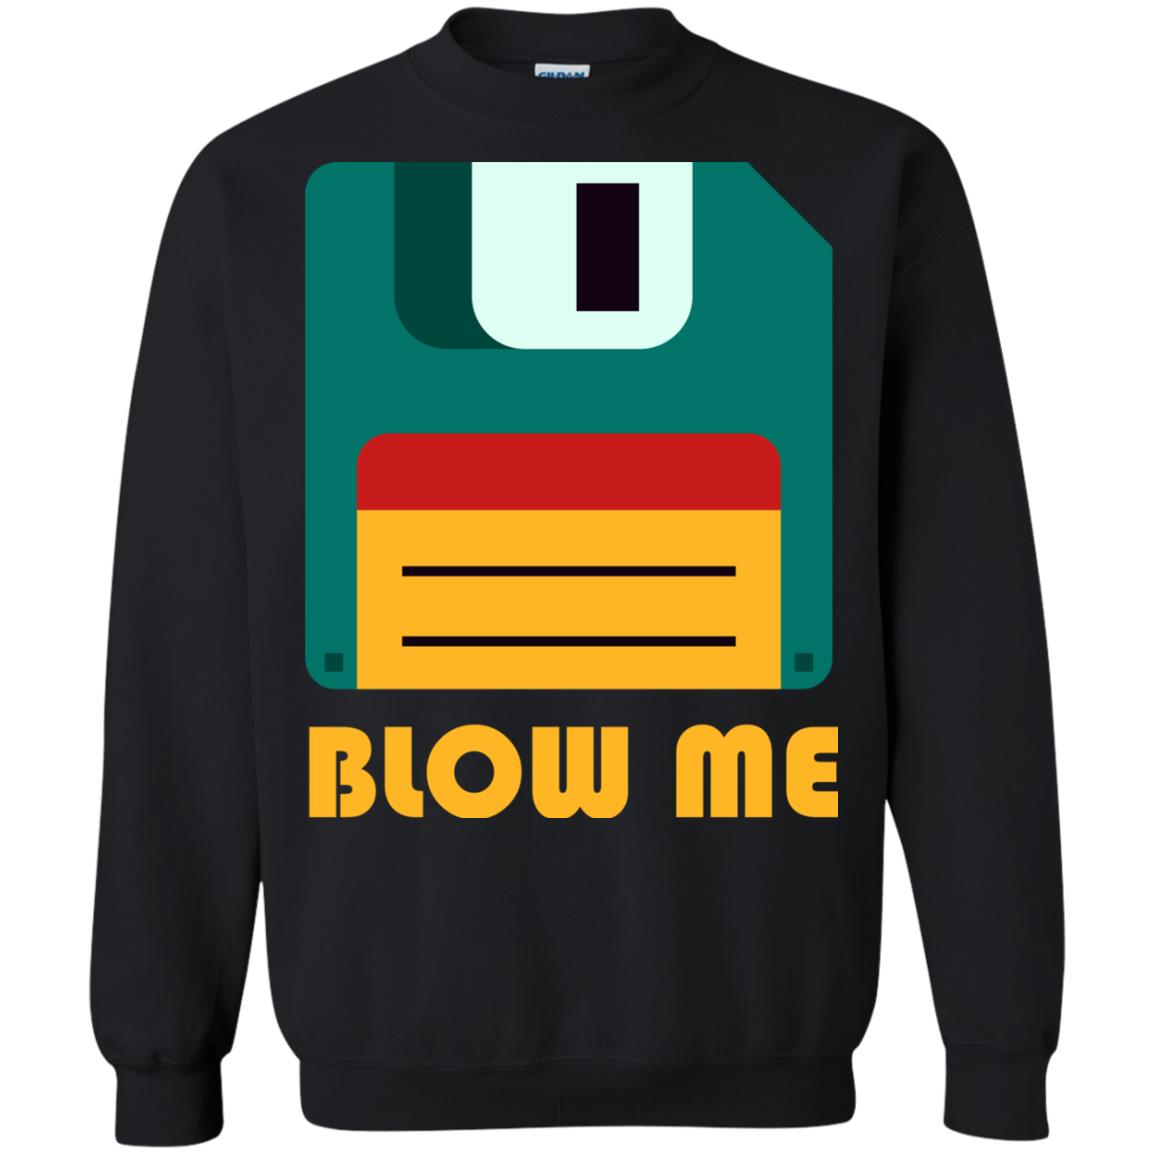 Blow Me Funny Floppy Disk Saying T-shirt